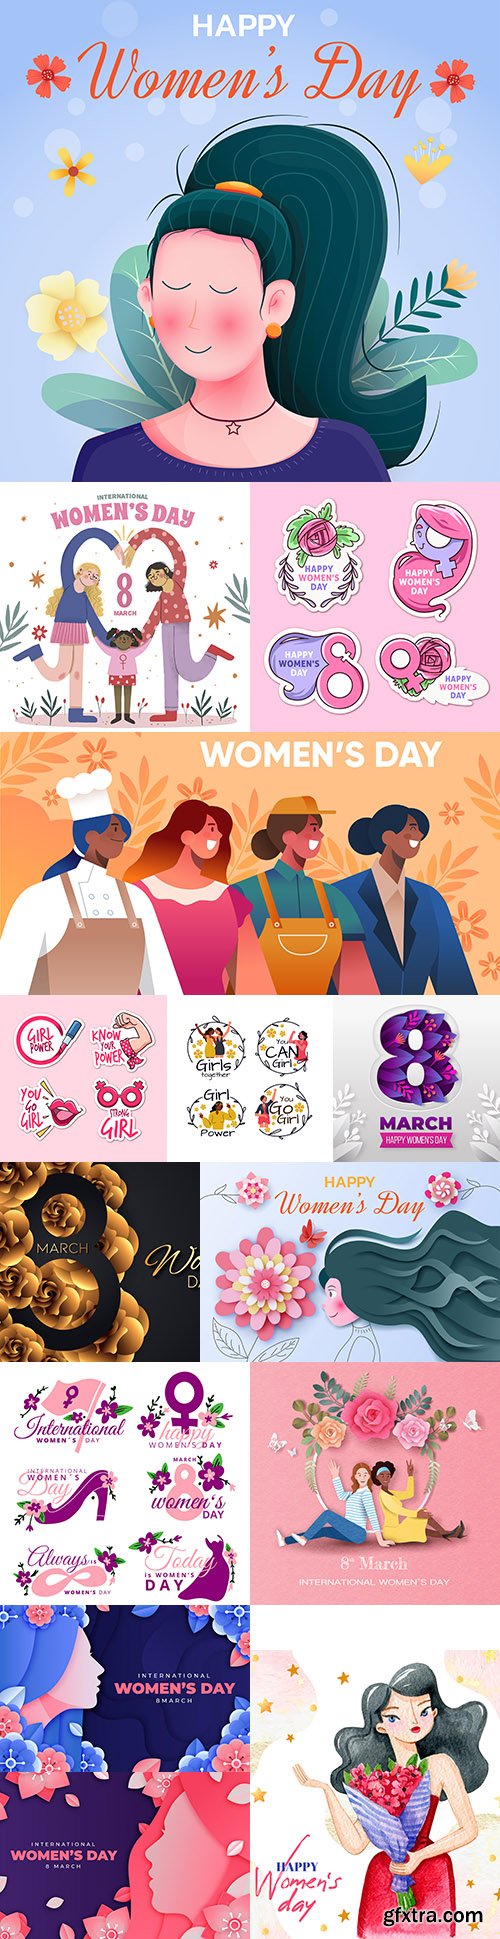 Happy Women's Day March 8 painted illustrations 3
